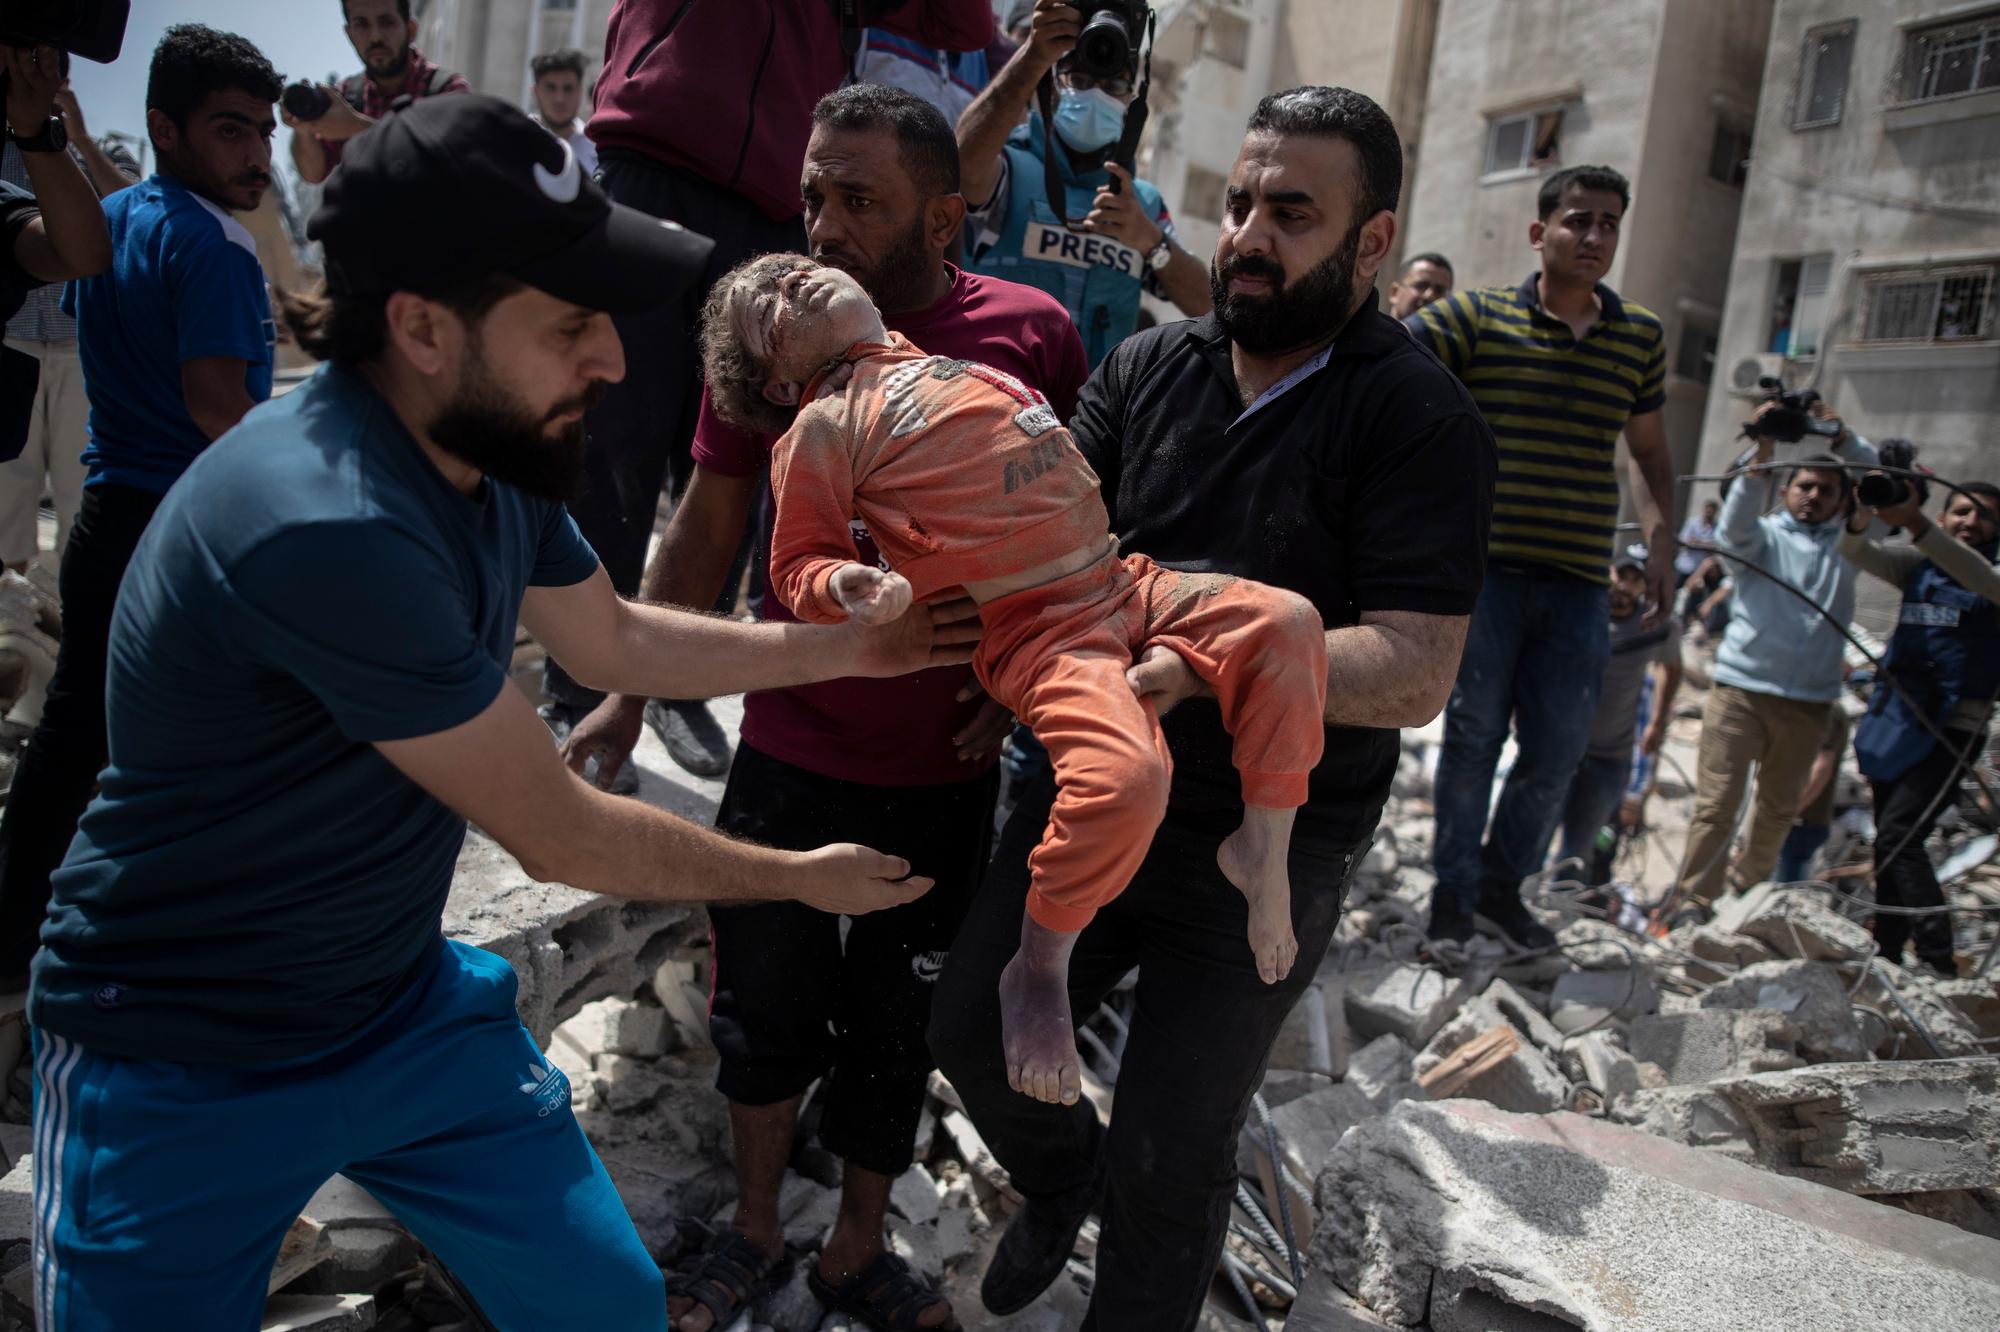 Men carry a dead child pulled from the rubble of a destroyed residential building in Gaza City following Israeli airstrikes on May 16, 2021, that flattened three buildings and killed at least two dozen people, according to medics. (AP Photo/Khalil Hamra)